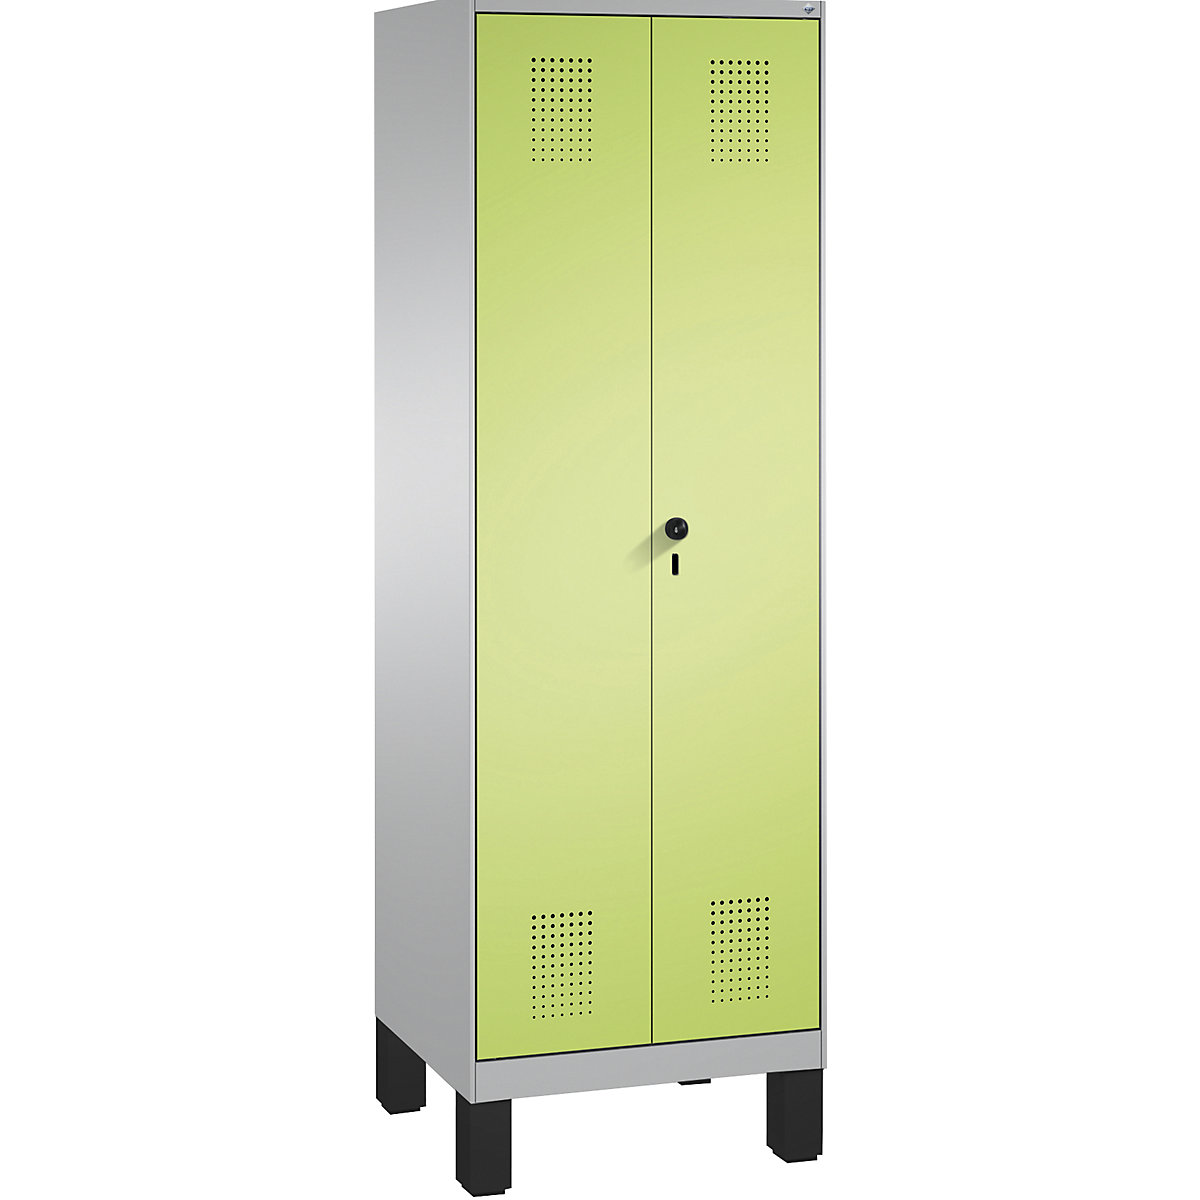 EVOLO storage cupboard, doors close in the middle, with feet – C+P, 2 compartments, 8 shelves, compartment width 300 mm, white aluminium / viridian green